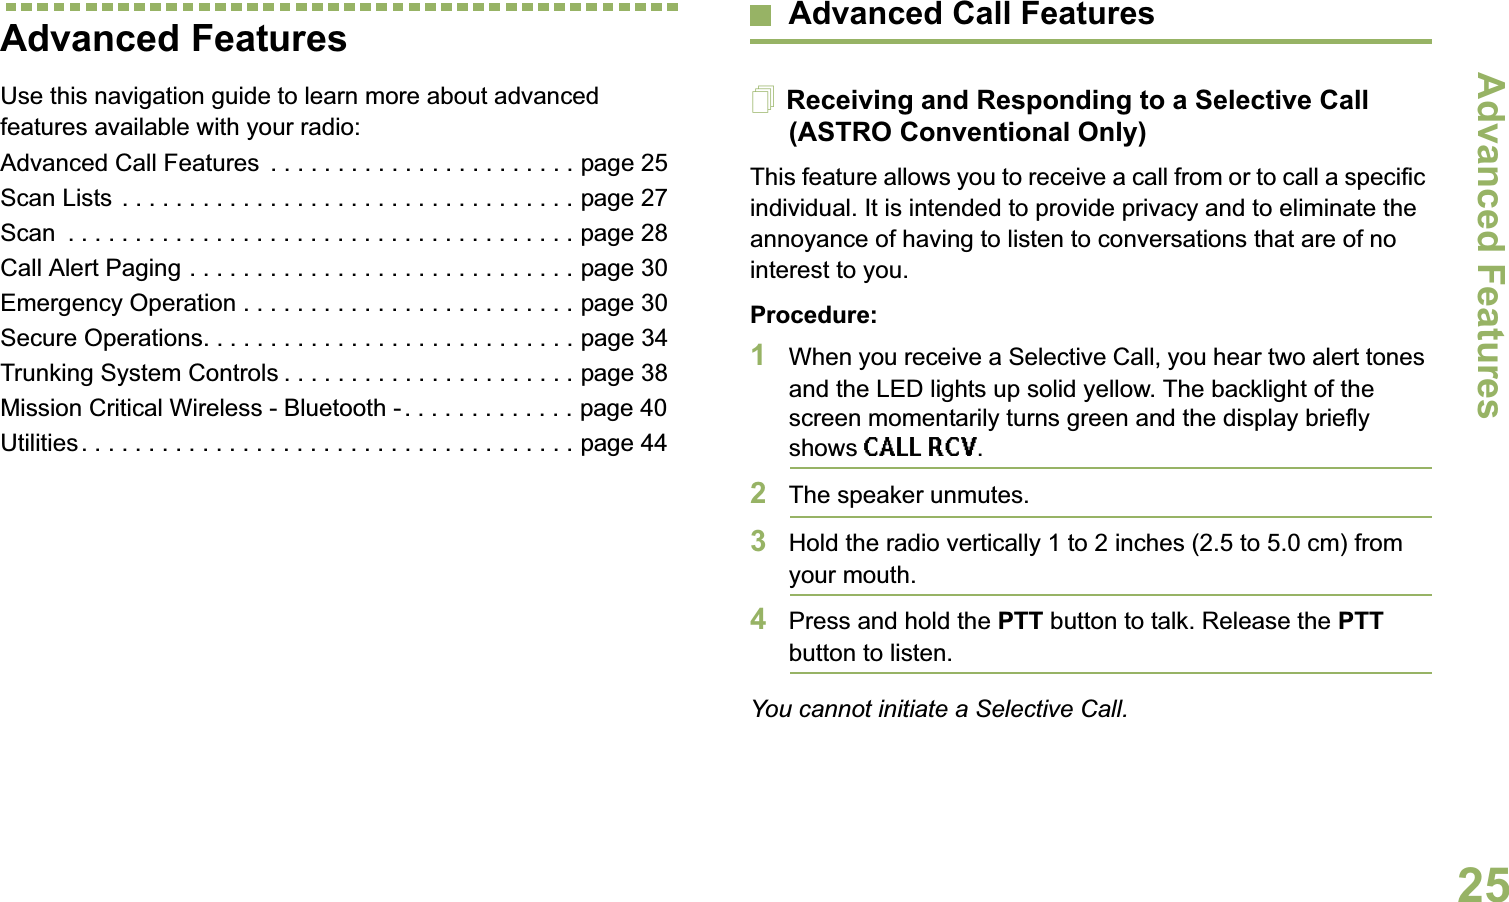 Advanced FeaturesEnglish25Advanced FeaturesUse this navigation guide to learn more about advanced features available with your radio:Advanced Call Features  . . . . . . . . . . . . . . . . . . . . . . . page 25Scan Lists . . . . . . . . . . . . . . . . . . . . . . . . . . . . . . . . . . page 27Scan  . . . . . . . . . . . . . . . . . . . . . . . . . . . . . . . . . . . . . . page 28Call Alert Paging . . . . . . . . . . . . . . . . . . . . . . . . . . . . . page 30Emergency Operation . . . . . . . . . . . . . . . . . . . . . . . . . page 30Secure Operations. . . . . . . . . . . . . . . . . . . . . . . . . . . . page 34Trunking System Controls . . . . . . . . . . . . . . . . . . . . . . page 38Mission Critical Wireless - Bluetooth - . . . . . . . . . . . . . page 40Utilities. . . . . . . . . . . . . . . . . . . . . . . . . . . . . . . . . . . . . page 44Advanced Call FeaturesReceiving and Responding to a Selective Call (ASTRO Conventional Only)This feature allows you to receive a call from or to call a specific individual. It is intended to provide privacy and to eliminate the annoyance of having to listen to conversations that are of no interest to you.Procedure:1When you receive a Selective Call, you hear two alert tones and the LED lights up solid yellow. The backlight of the screen momentarily turns green and the display briefly shows CALL RCV.2The speaker unmutes.3Hold the radio vertically 1 to 2 inches (2.5 to 5.0 cm) from your mouth.4Press and hold the PTT button to talk. Release the PTT button to listen.You cannot initiate a Selective Call.